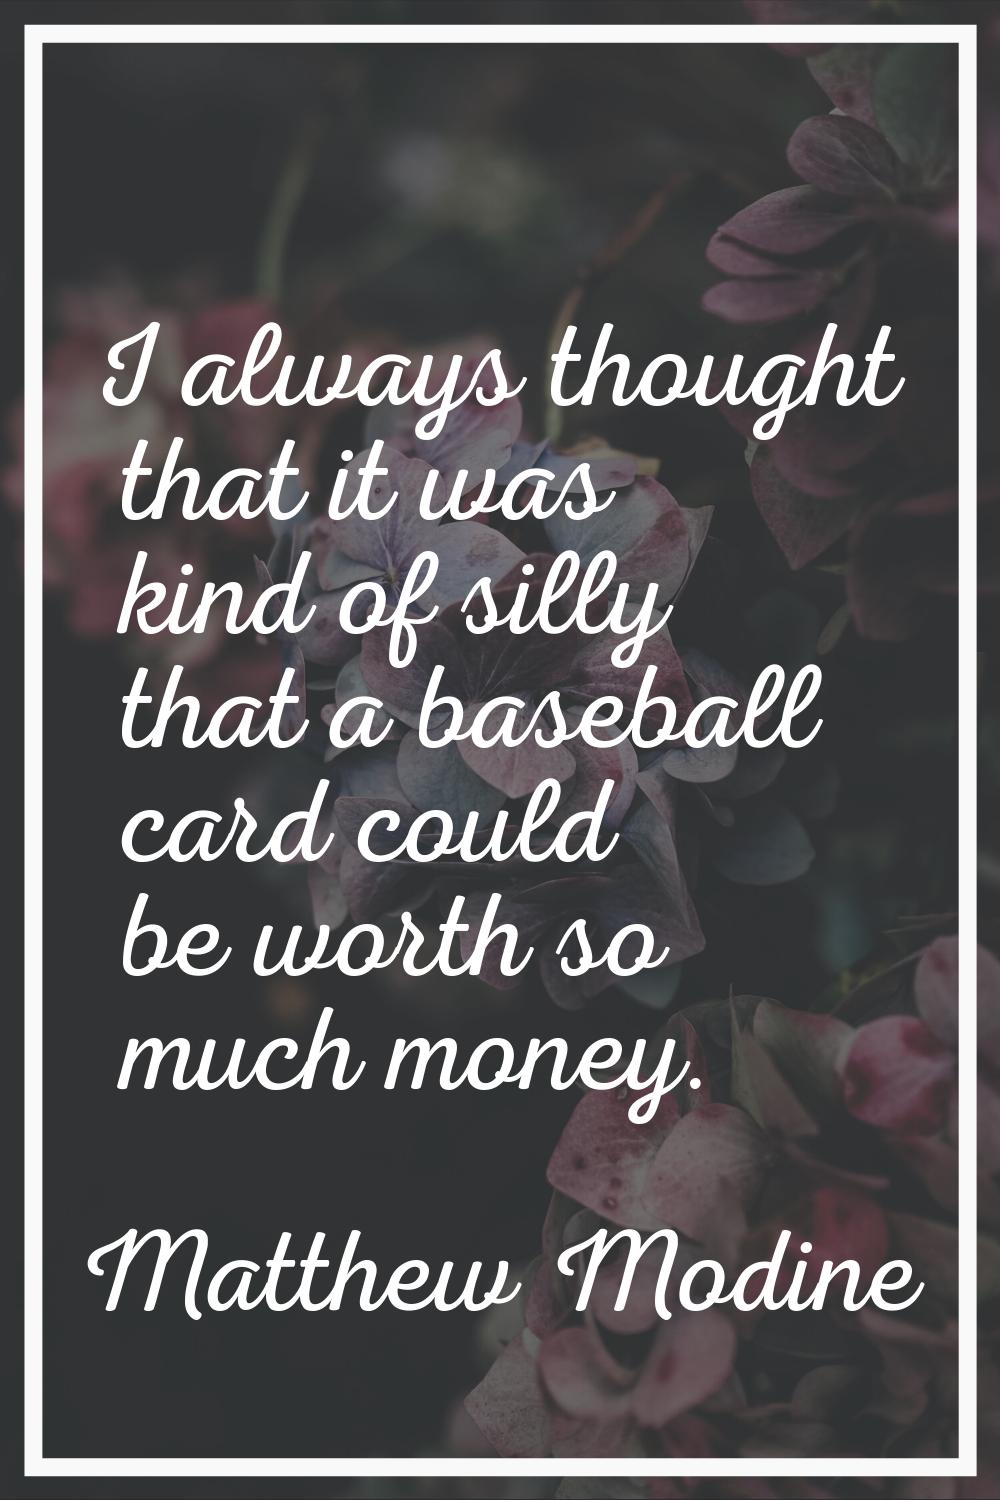 I always thought that it was kind of silly that a baseball card could be worth so much money.